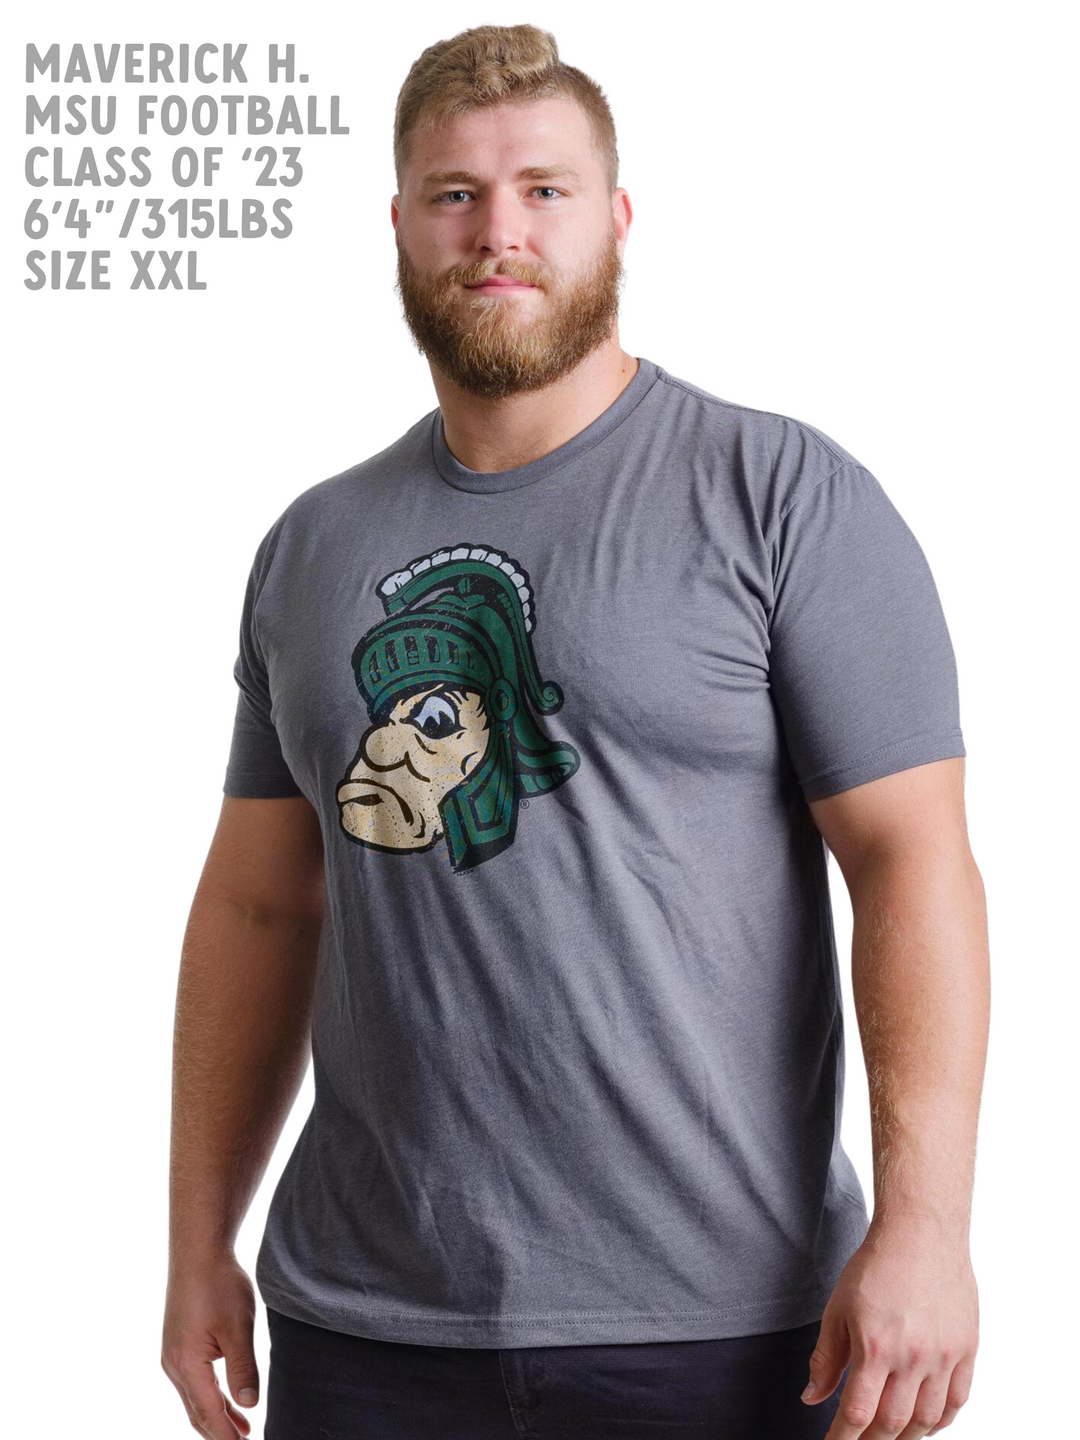 Vintage Michigan State Spartans Full Color MSU Gruff Sparty T-Shirt